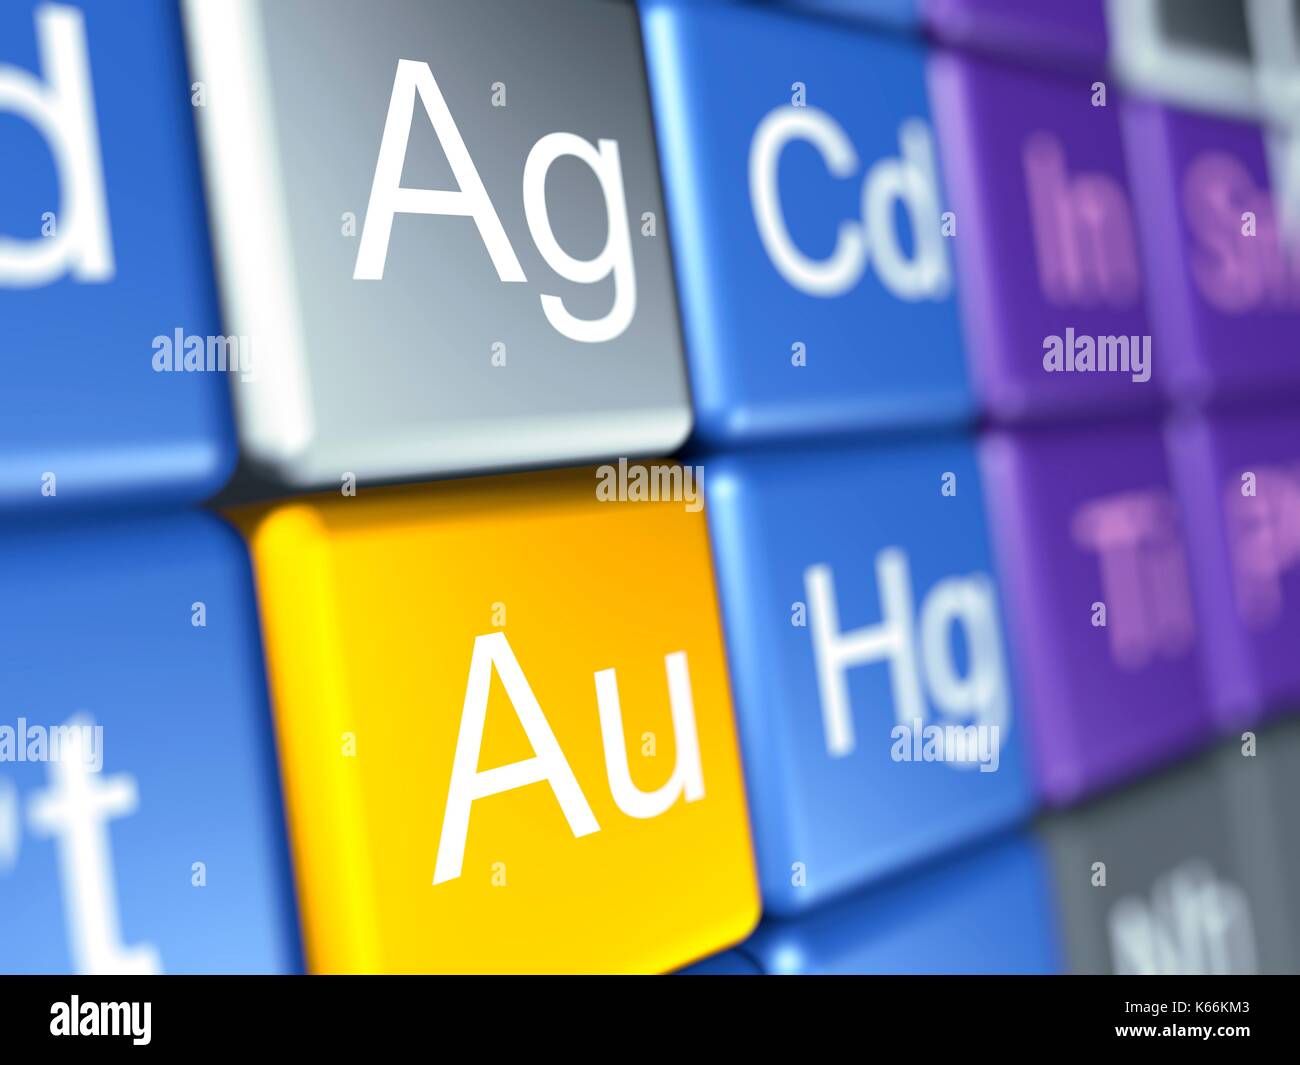 Computer artwork of a close-up of the periodic table focussed on the chemical elements silver (Ag=Argentum) and gold (Au=Aurum). Stock Photo